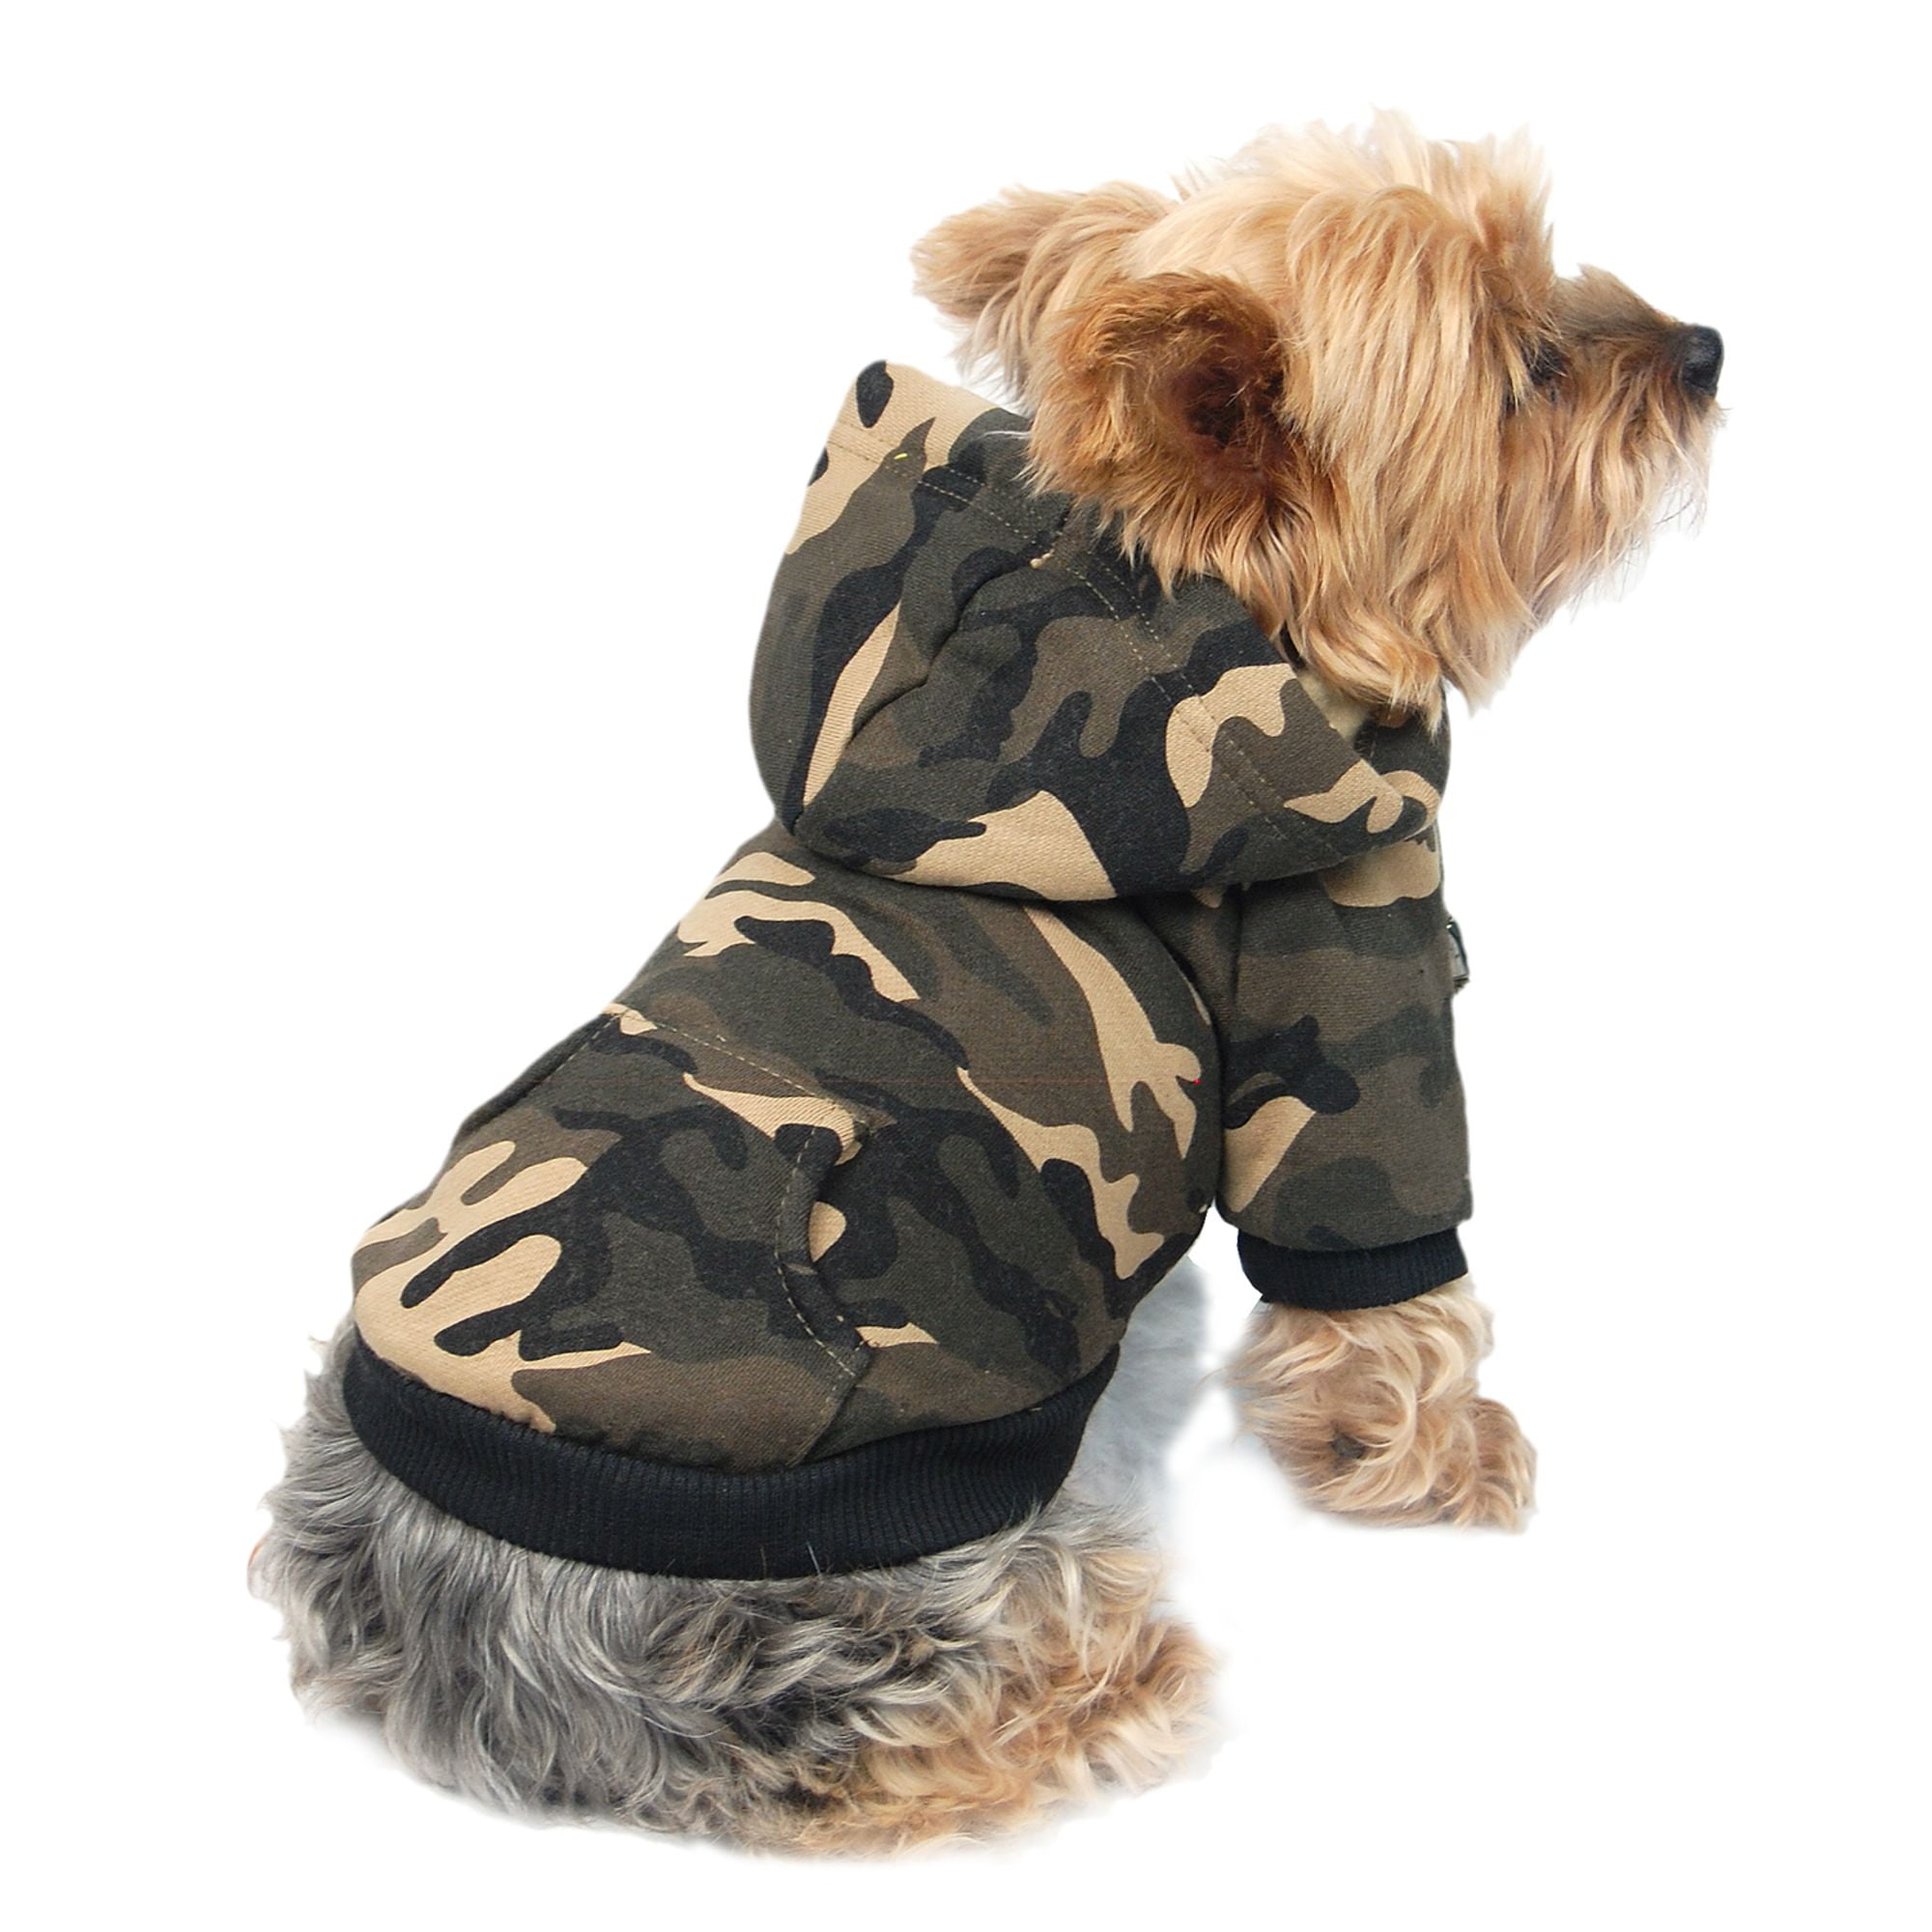 Dog Sweaters Pet Dog Puppy Clothes Soft Sweatshirt Hoodies Pullover Coat Clothing Apparel ...